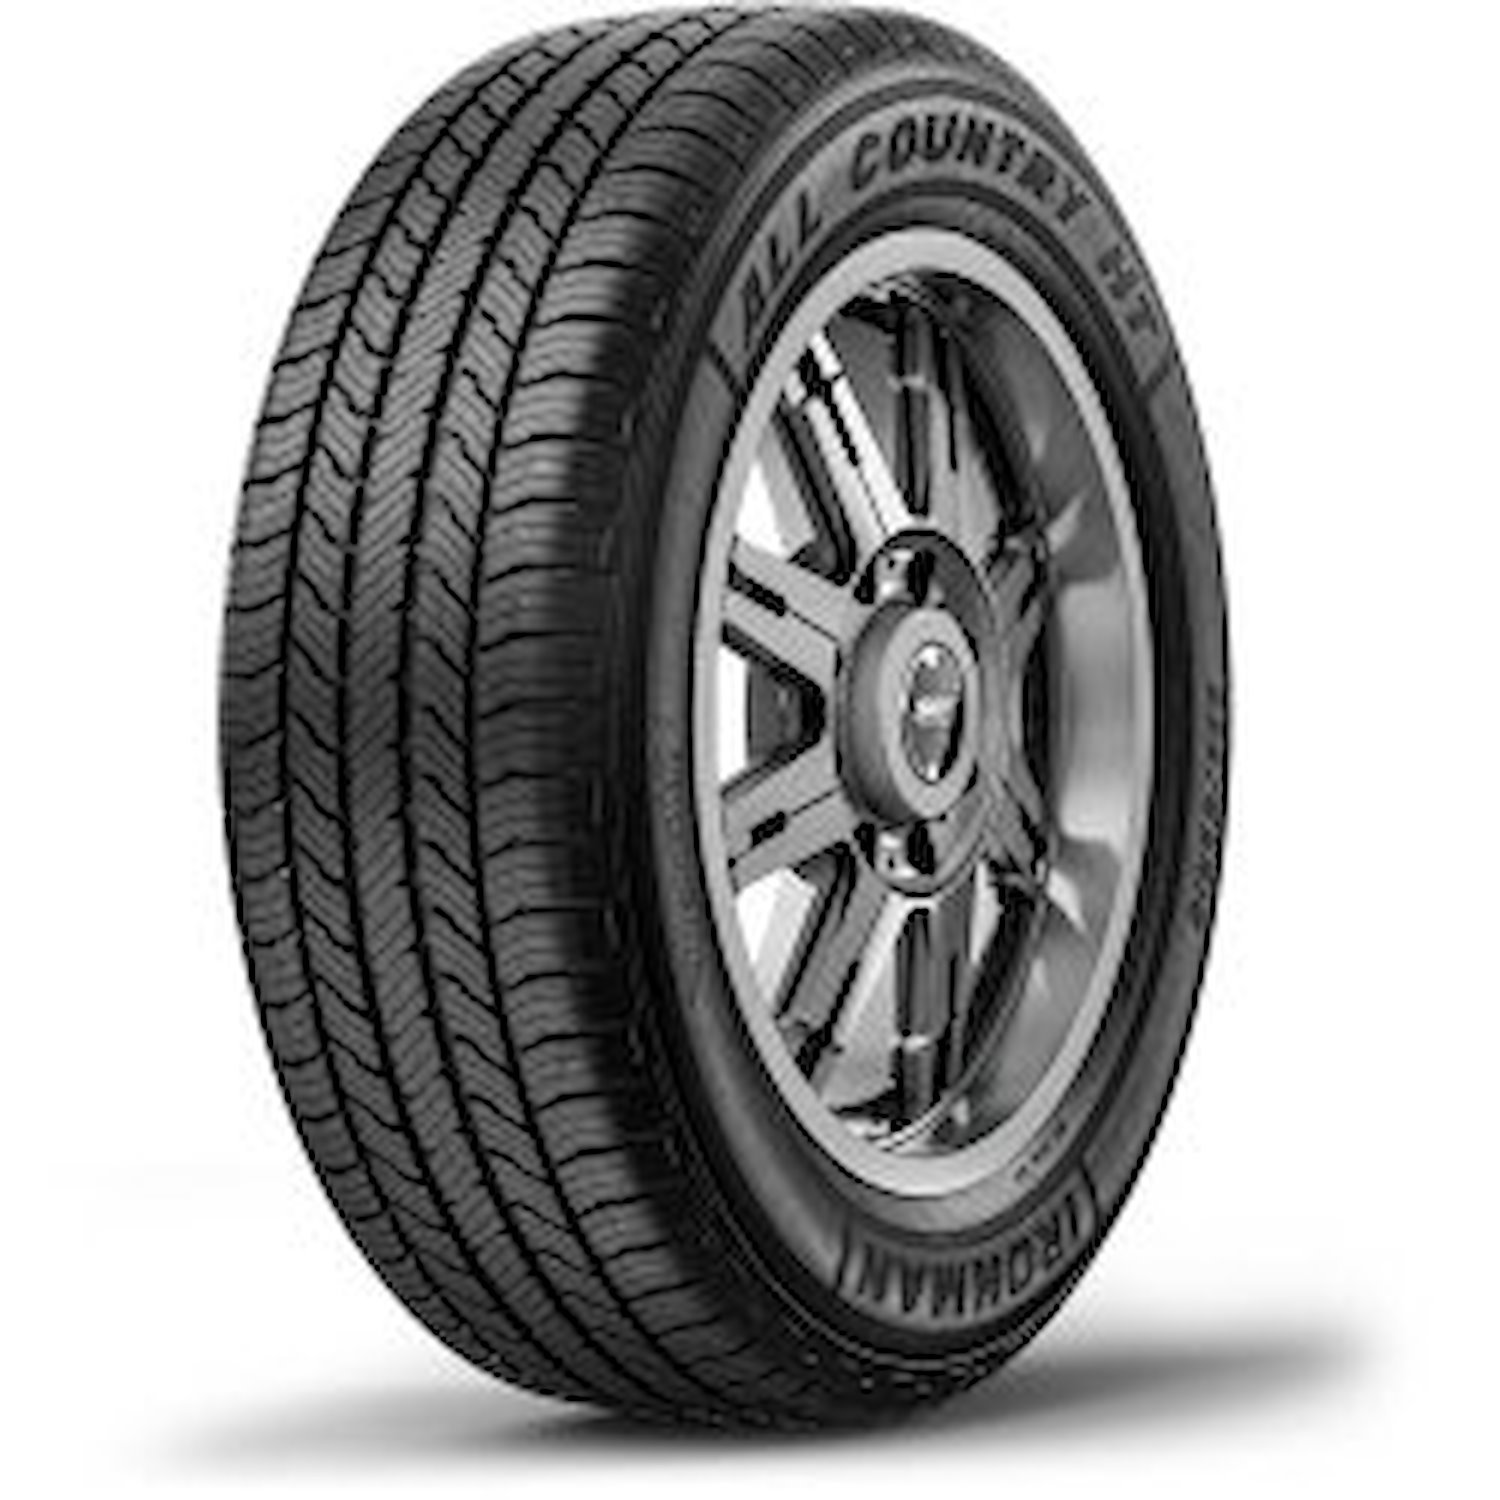 03136 All Country HT Tire, 275/55R20XL, 117H